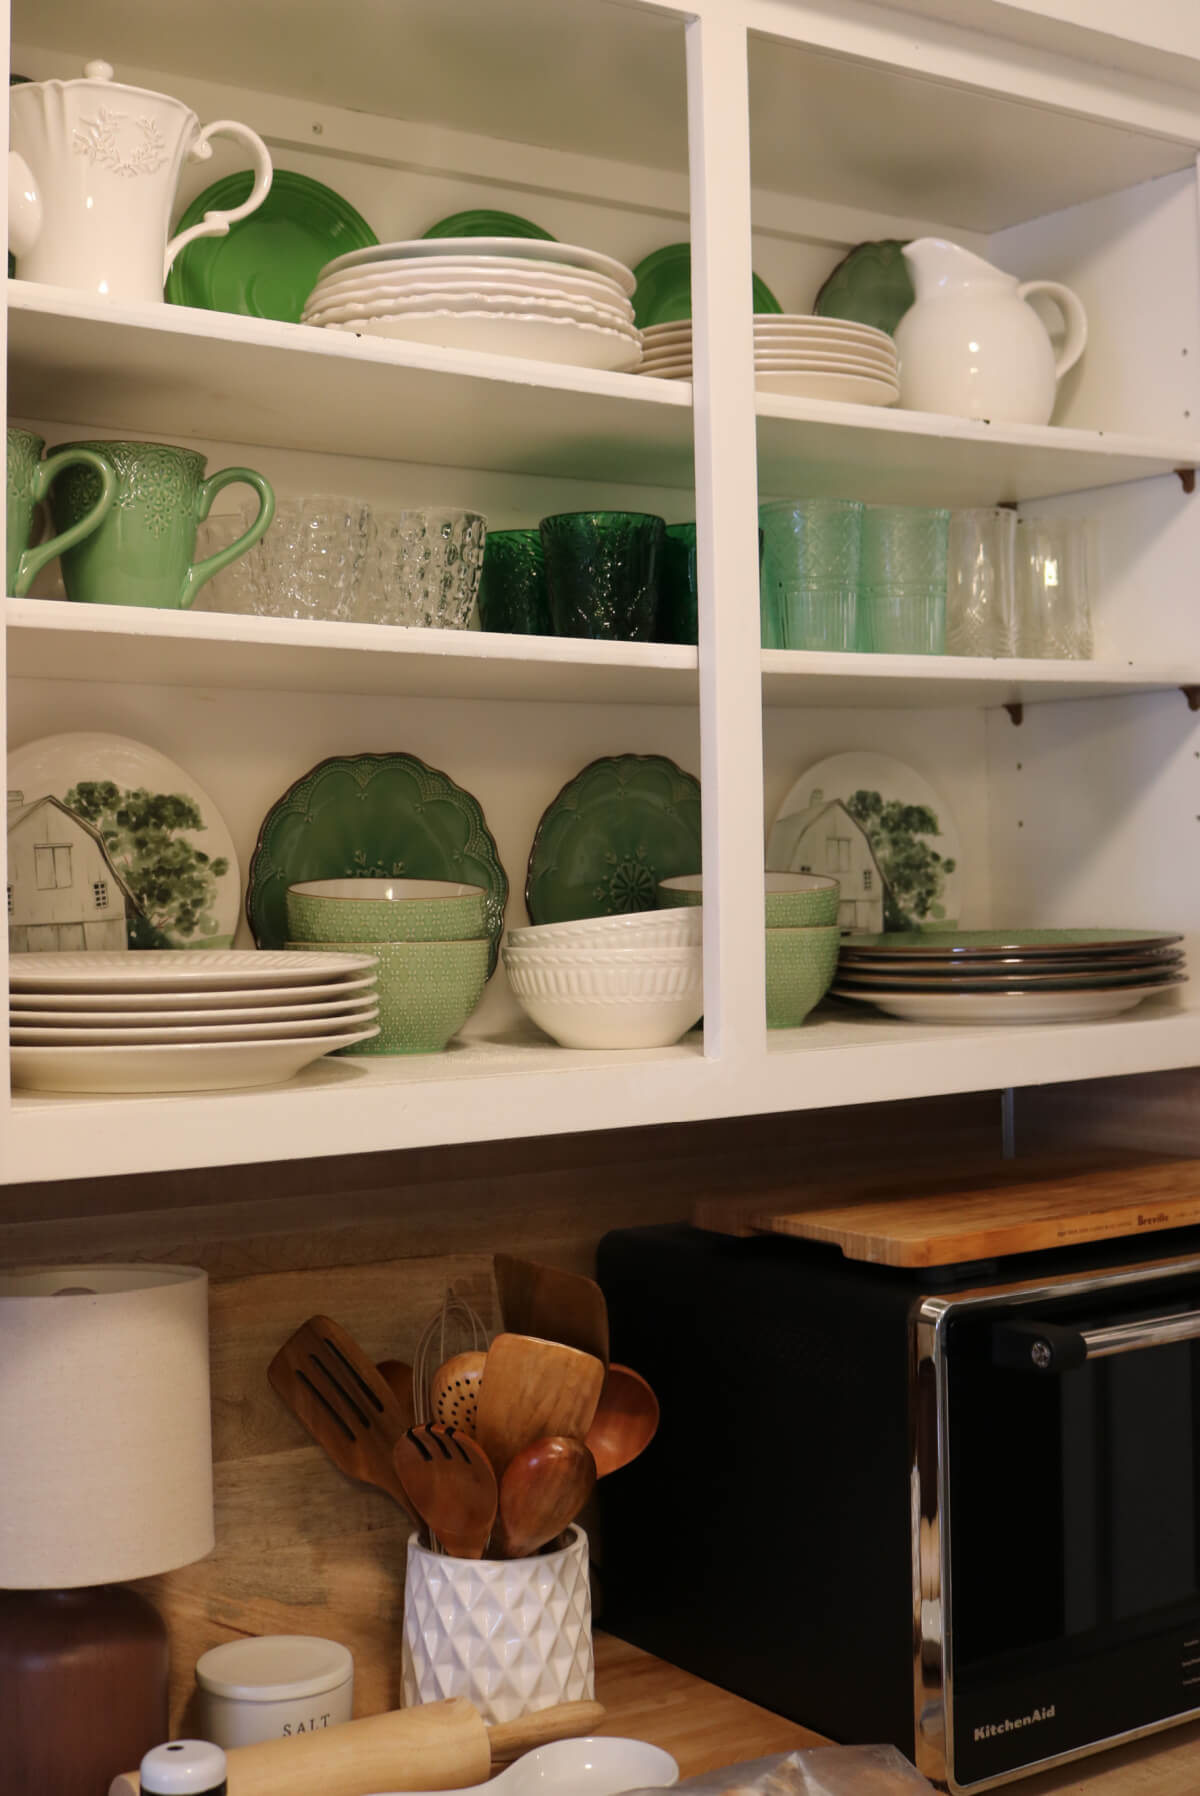 In My Apartment Kitchen Revisited For Fall, the green and white dishware in my open kitchen cabinets.